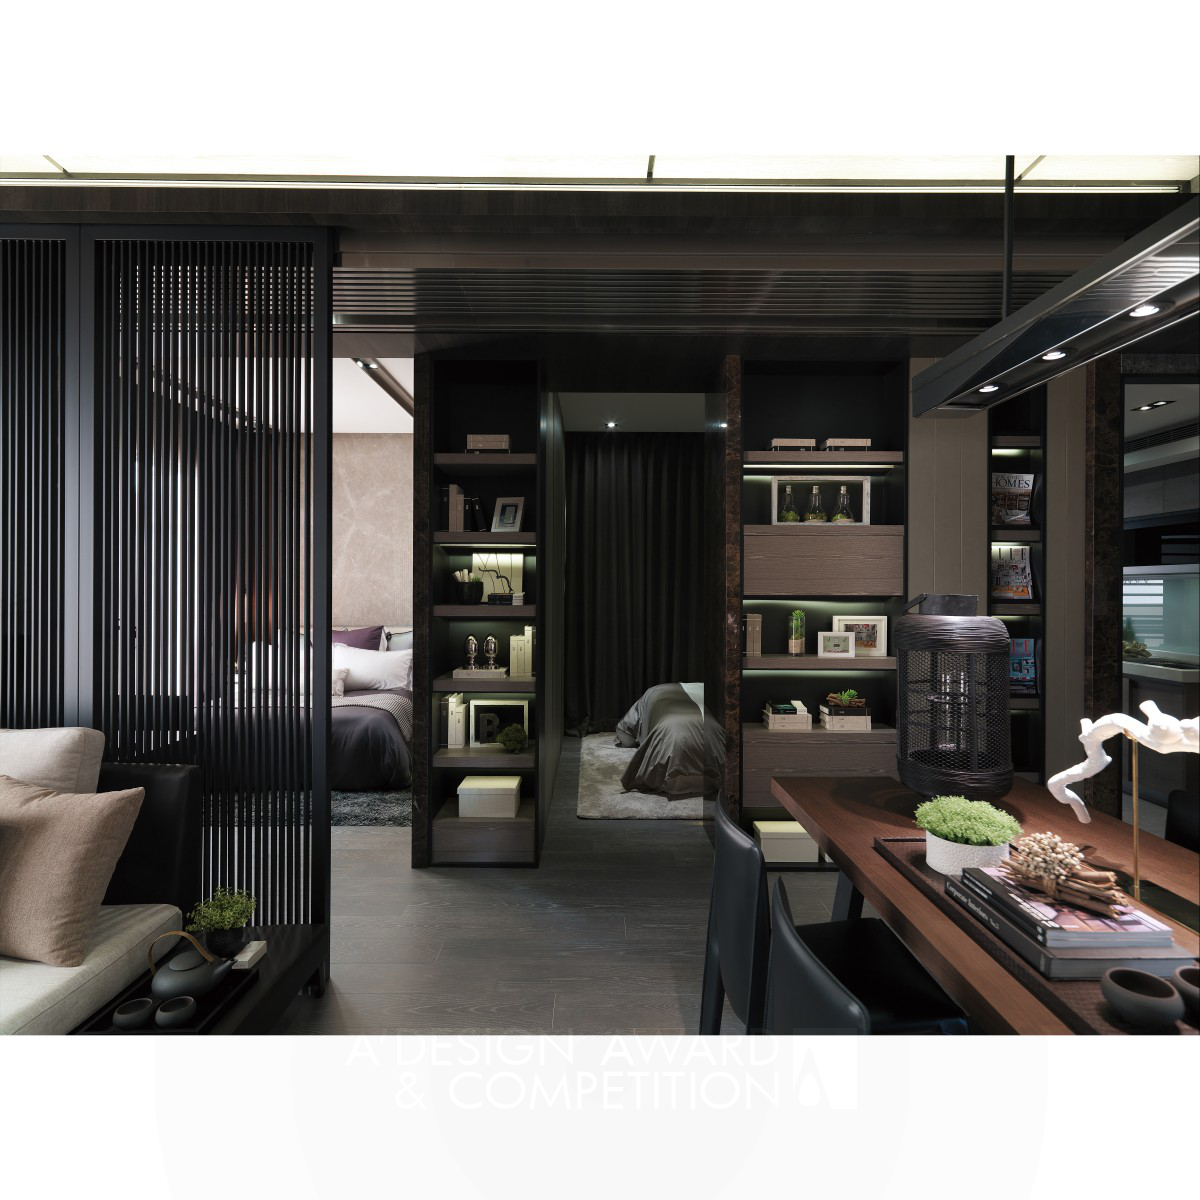 Hsiang-hao Chang Residential interior design